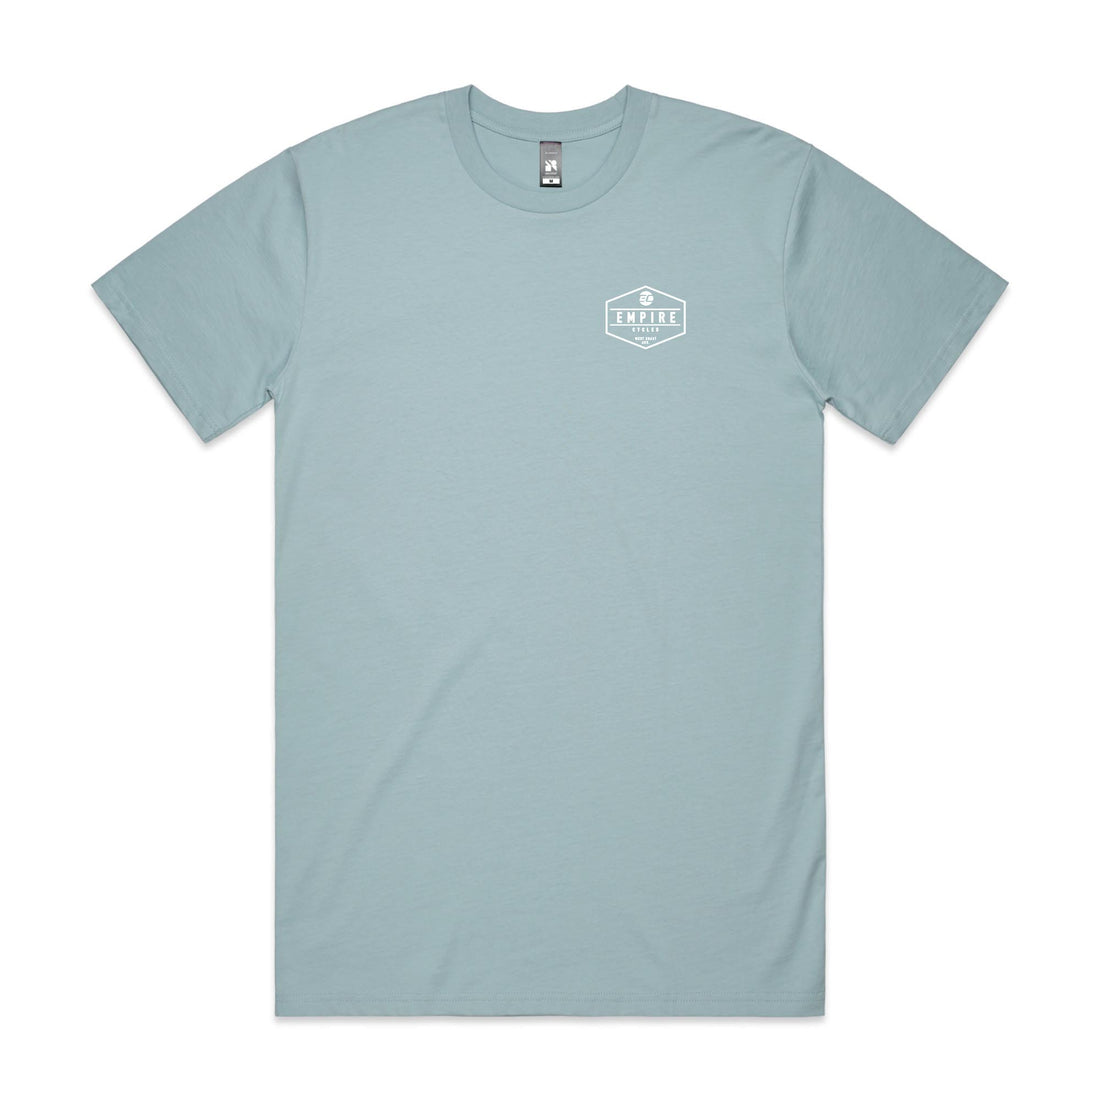 Empire Cycles Plate T-Shirt - Blue